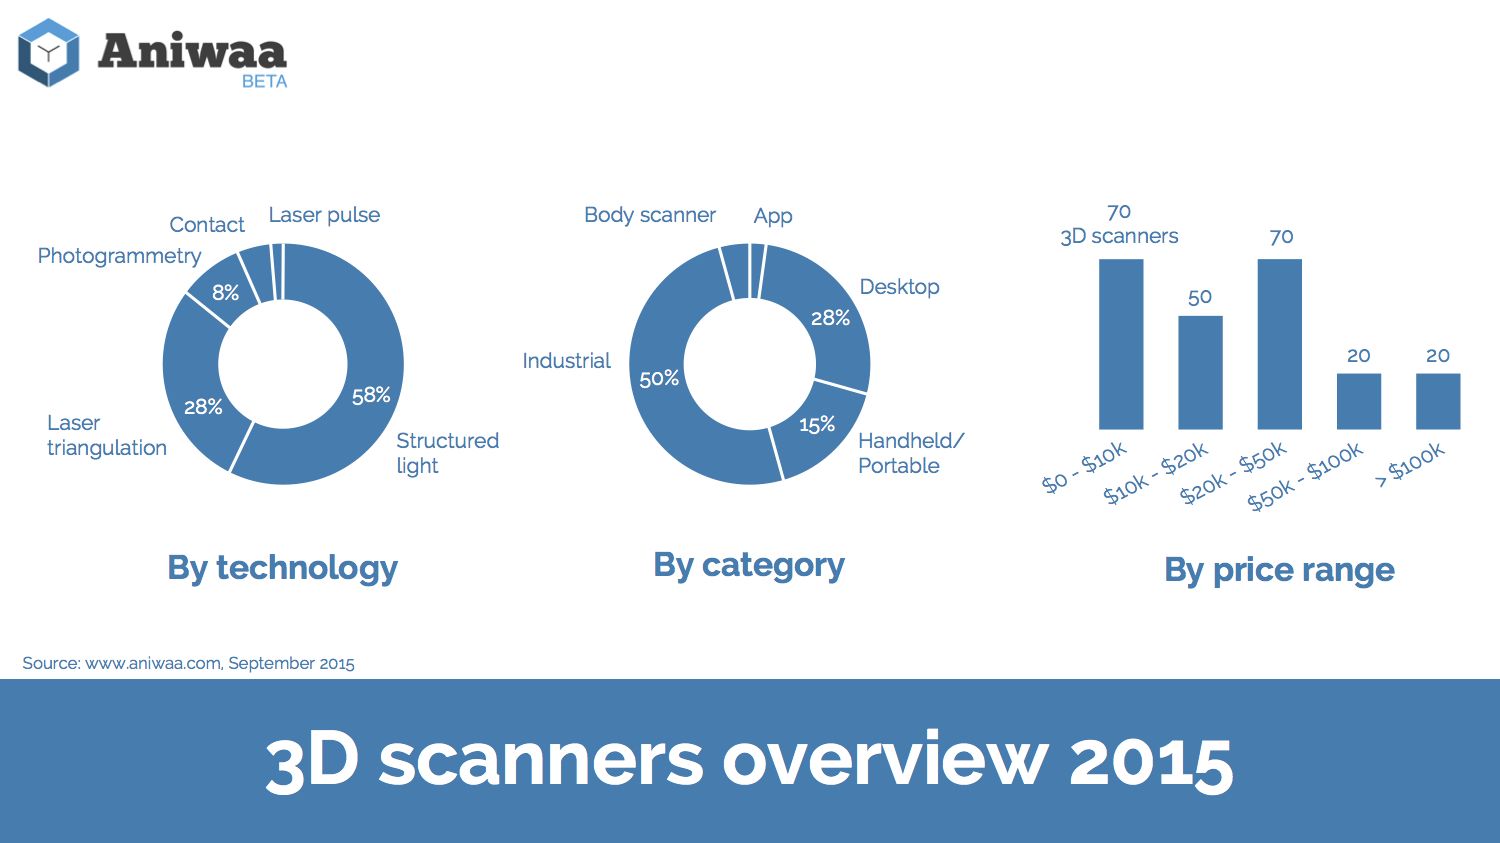 3D scanners market overview, 2015